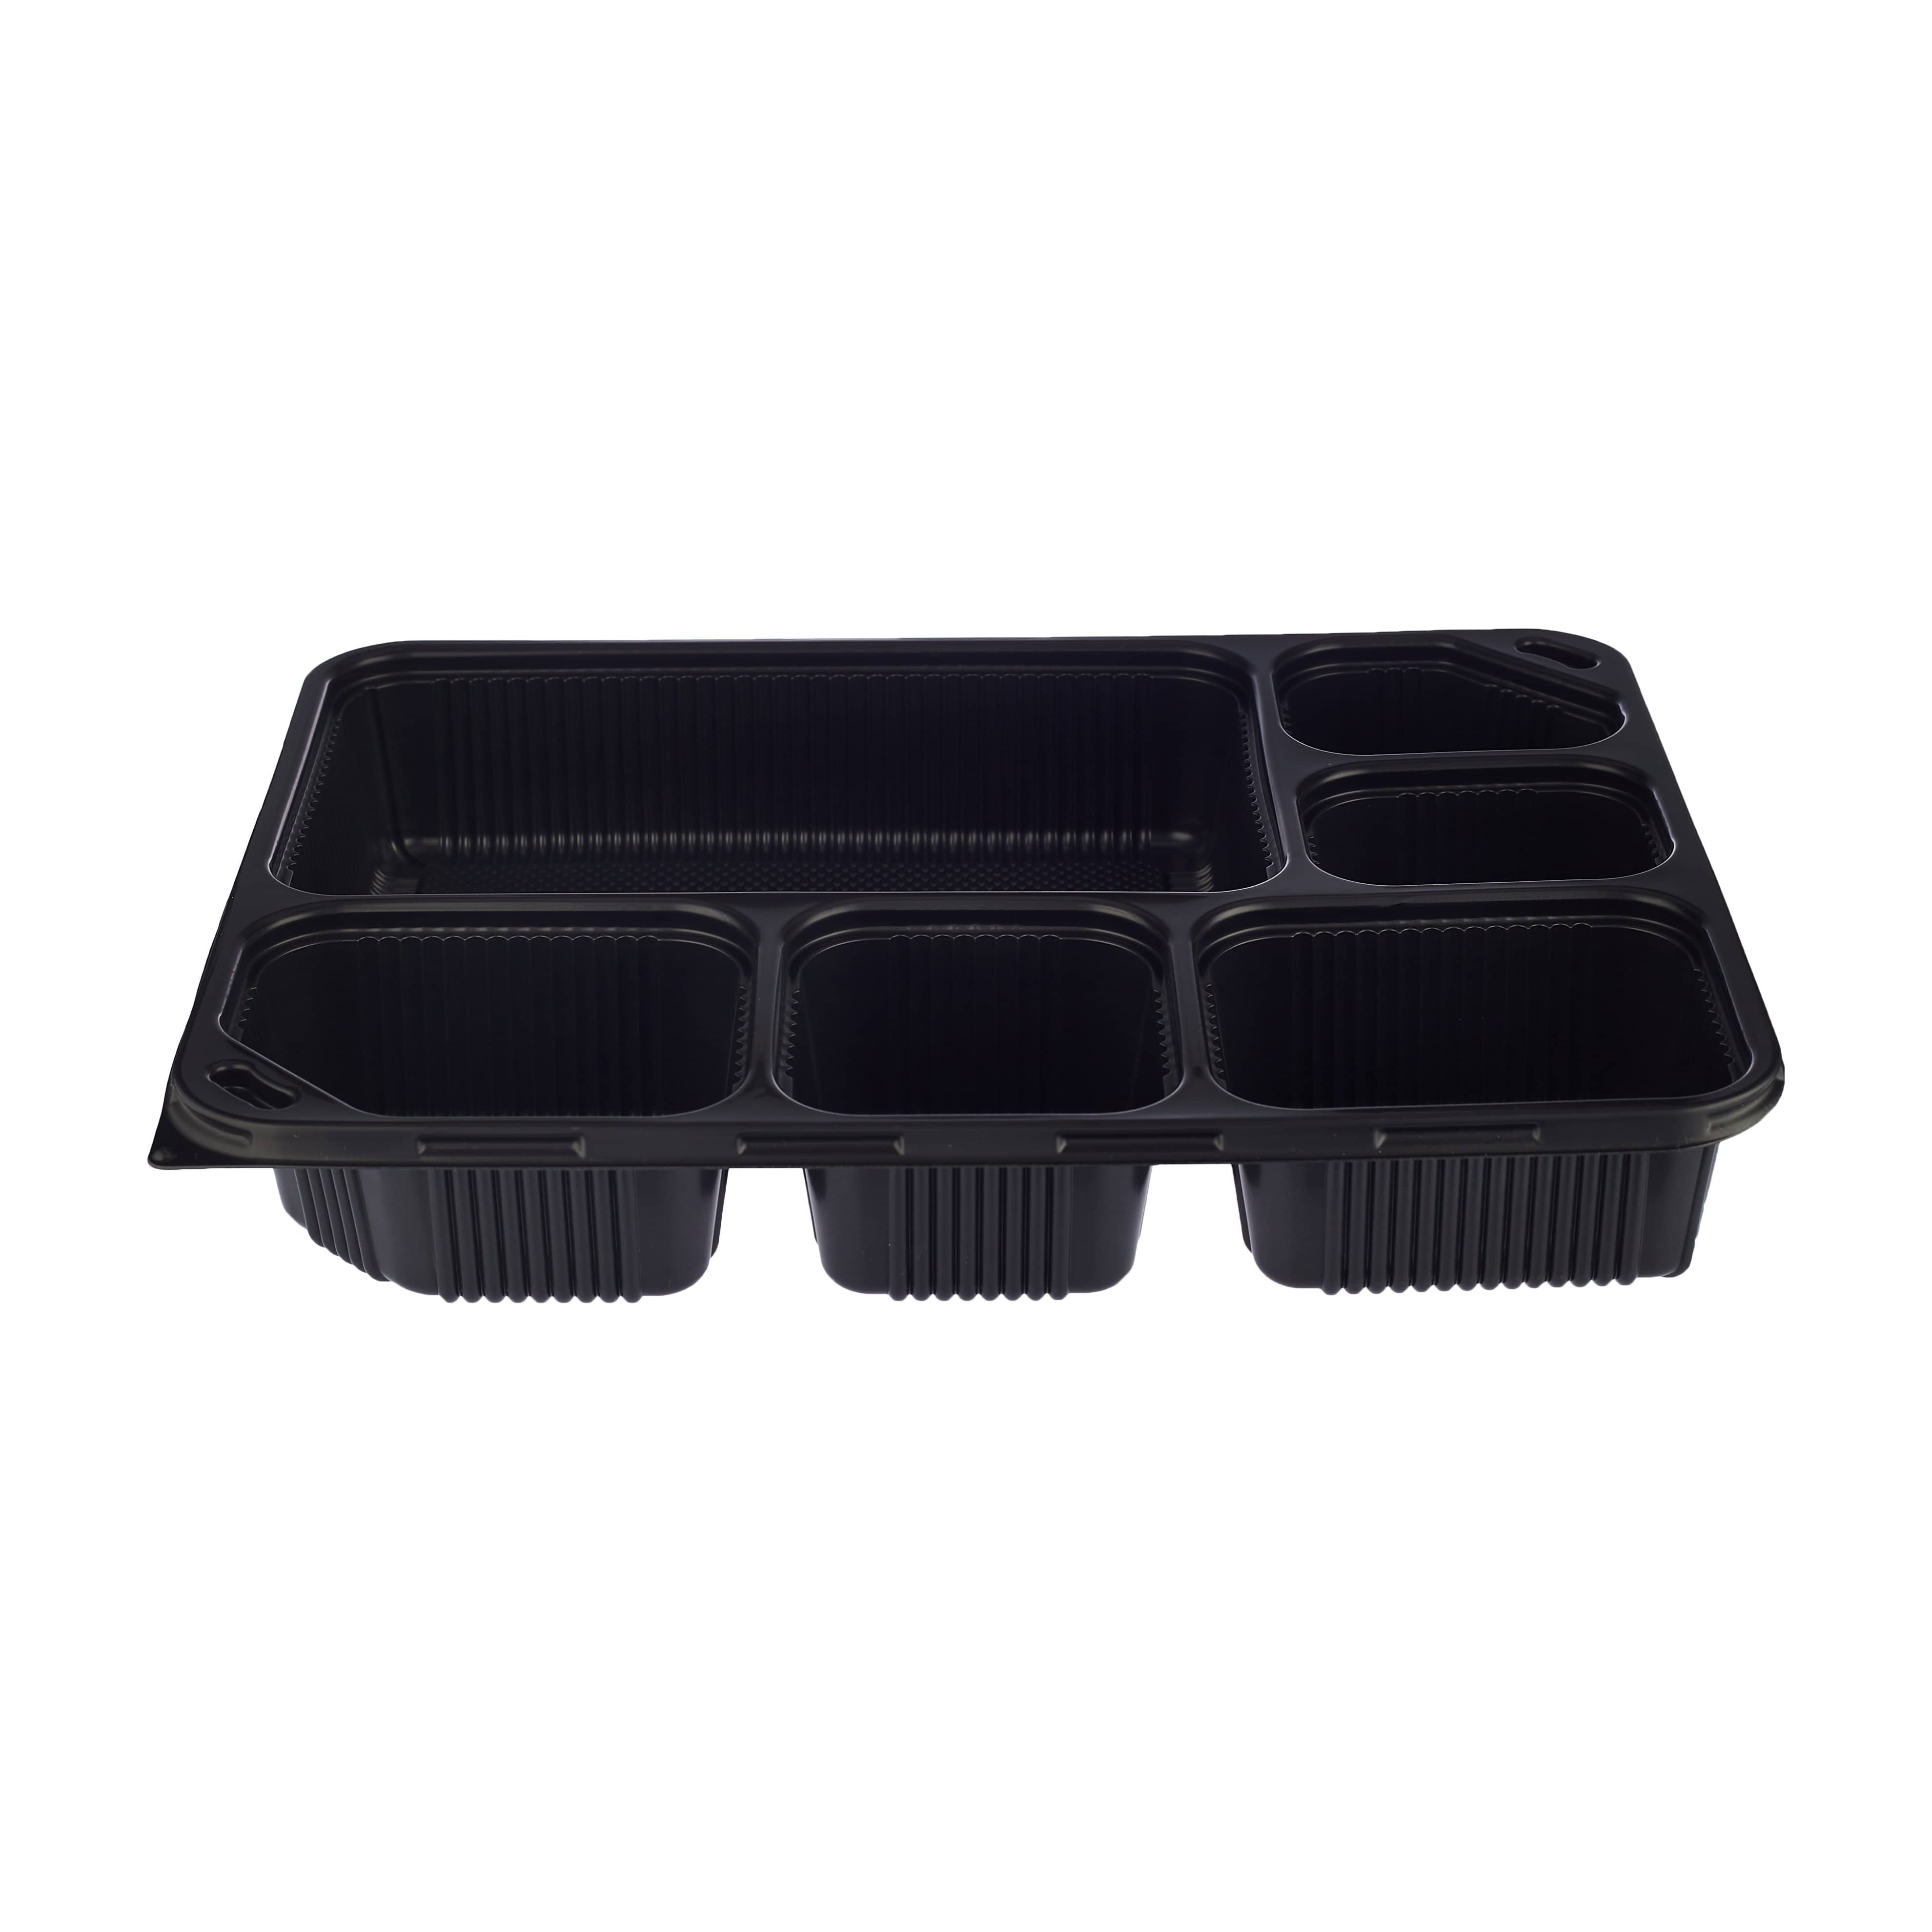 Black Base Rectangular 6-Compartment Container + Lids 150 Pieces - Hotpack Global